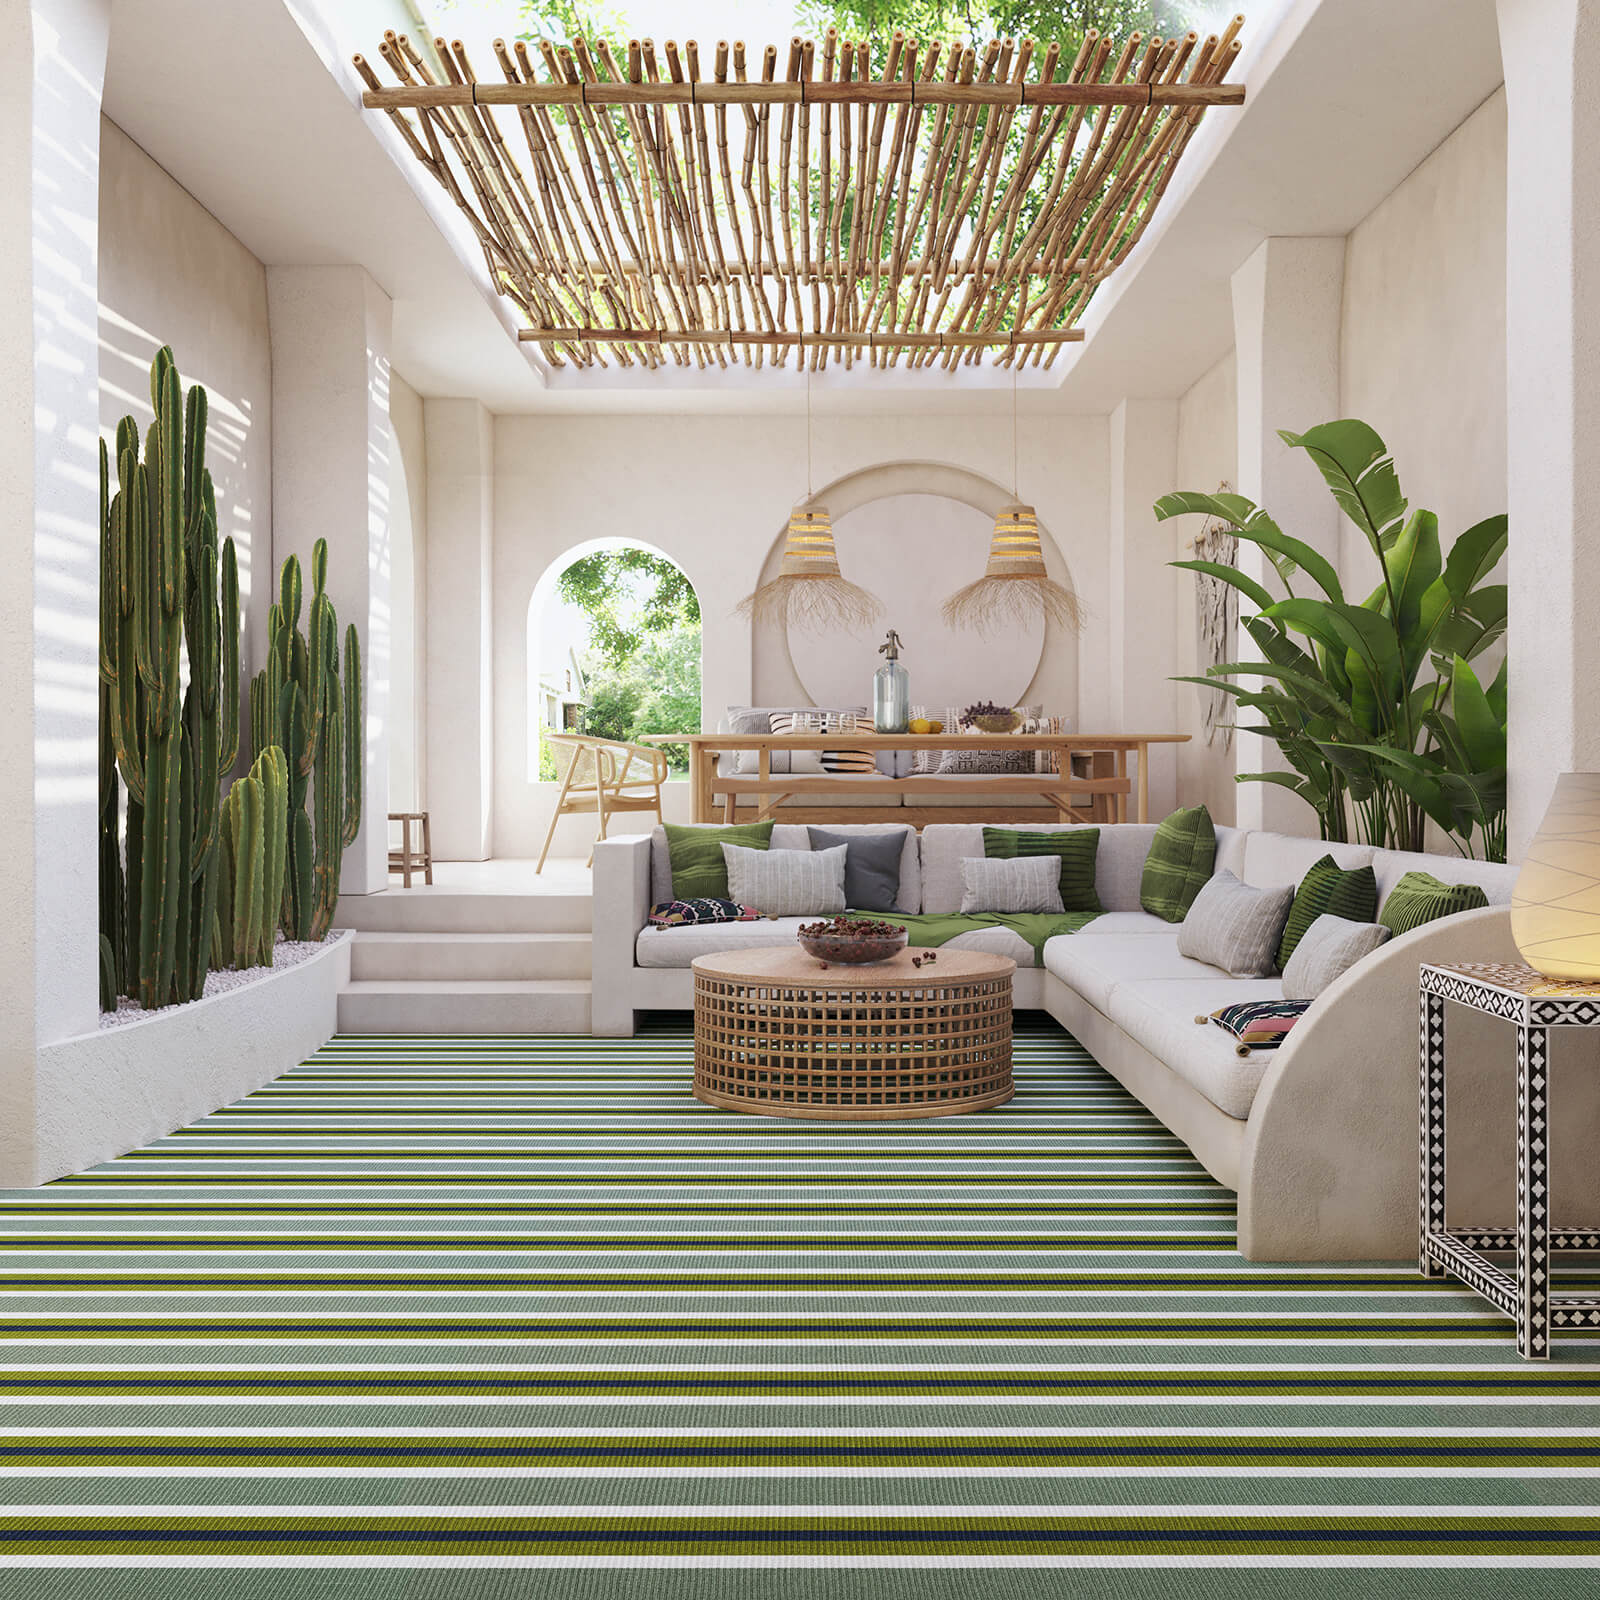 Lifestyle Visualization of a Striped Green Carpet